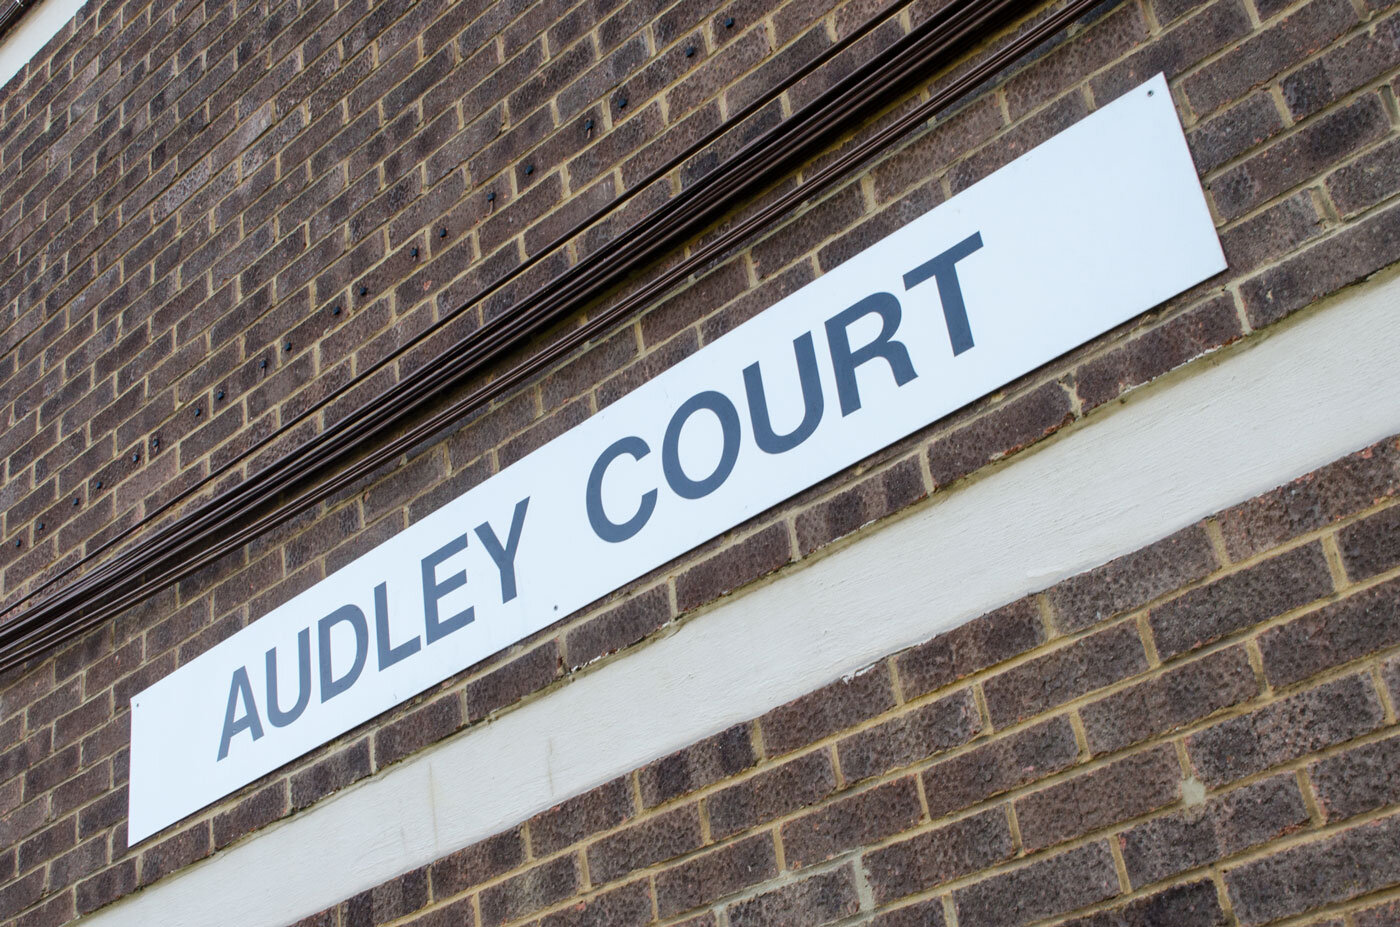 Audley-Court--(18-of-19).jpg